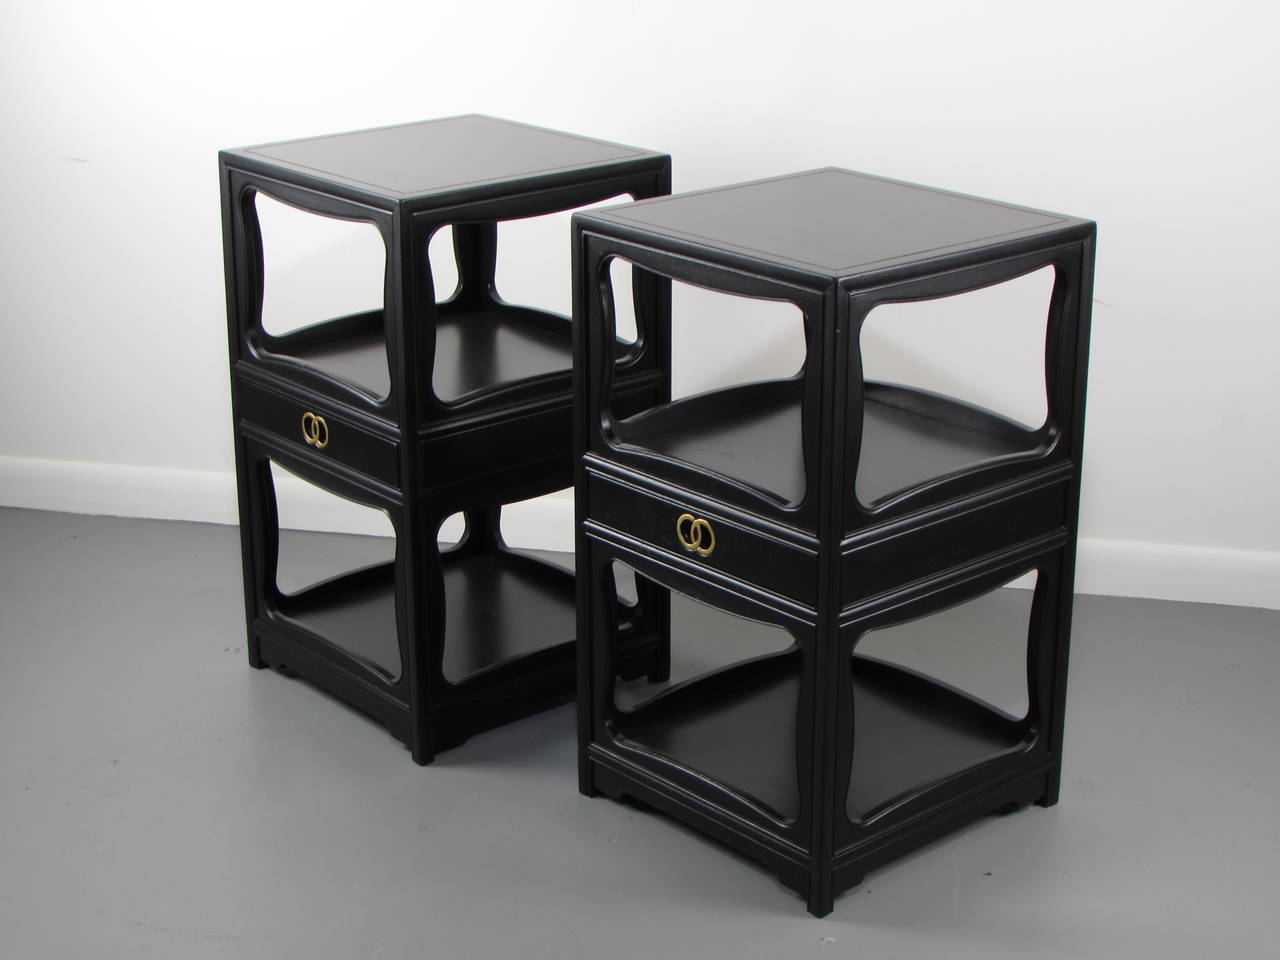 American Pair of Lacquered End Tables or Nightstands by Michael Taylor for Baker, 1950s